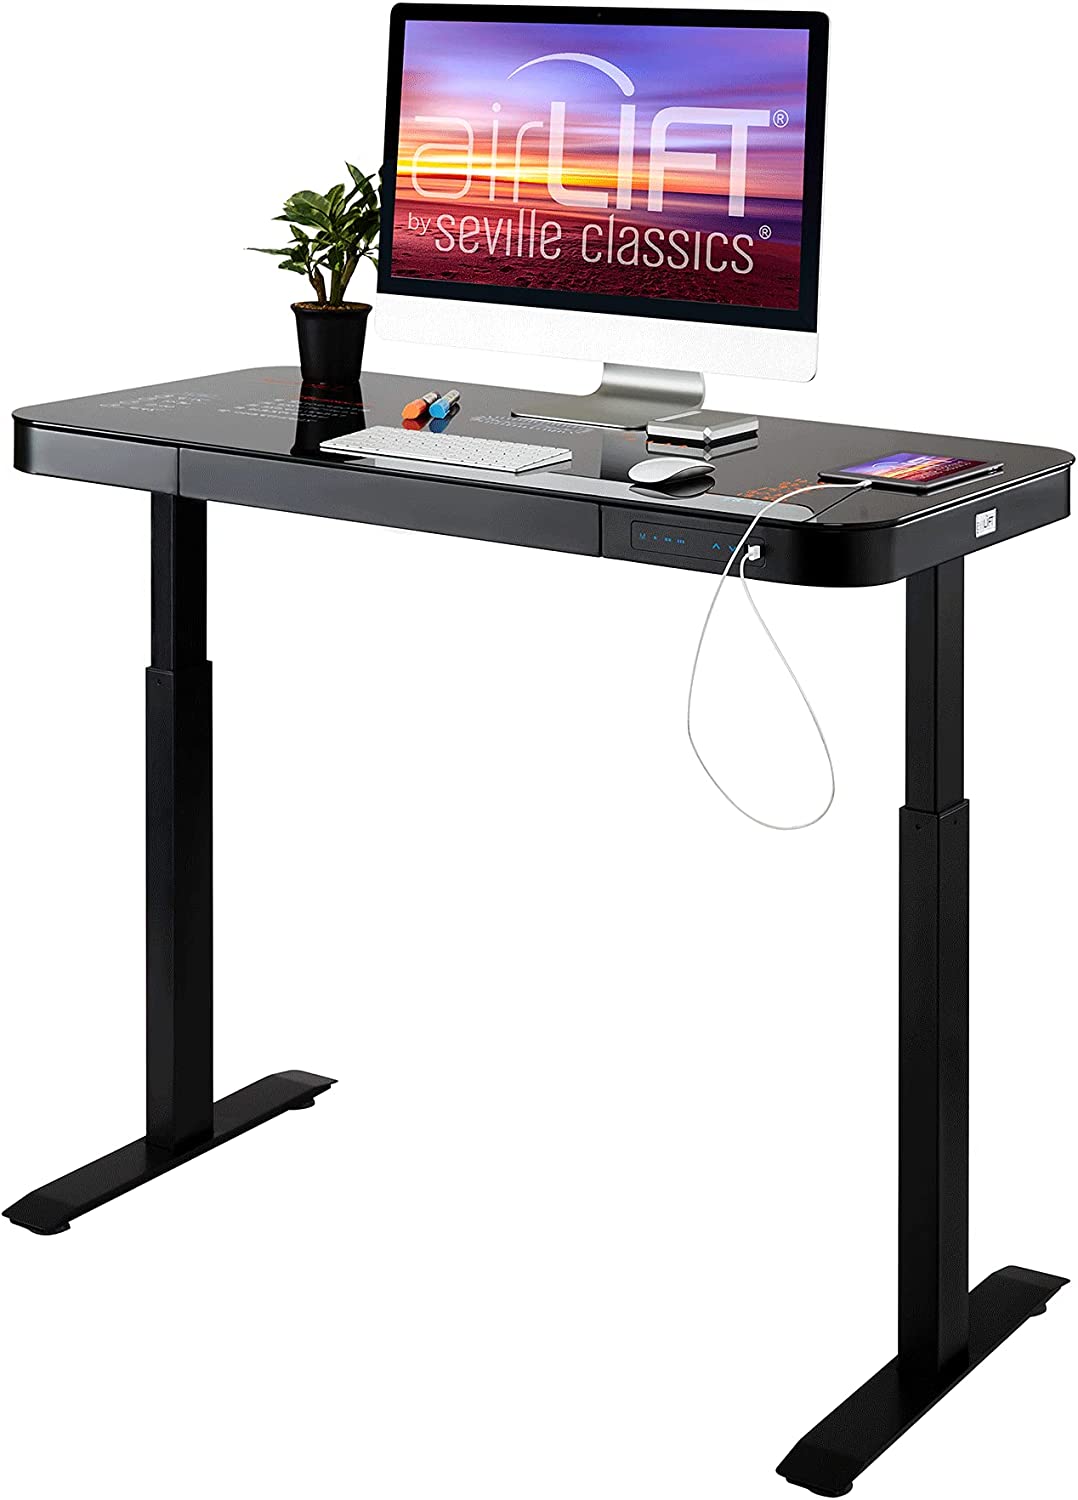 Airlift electric standing desk